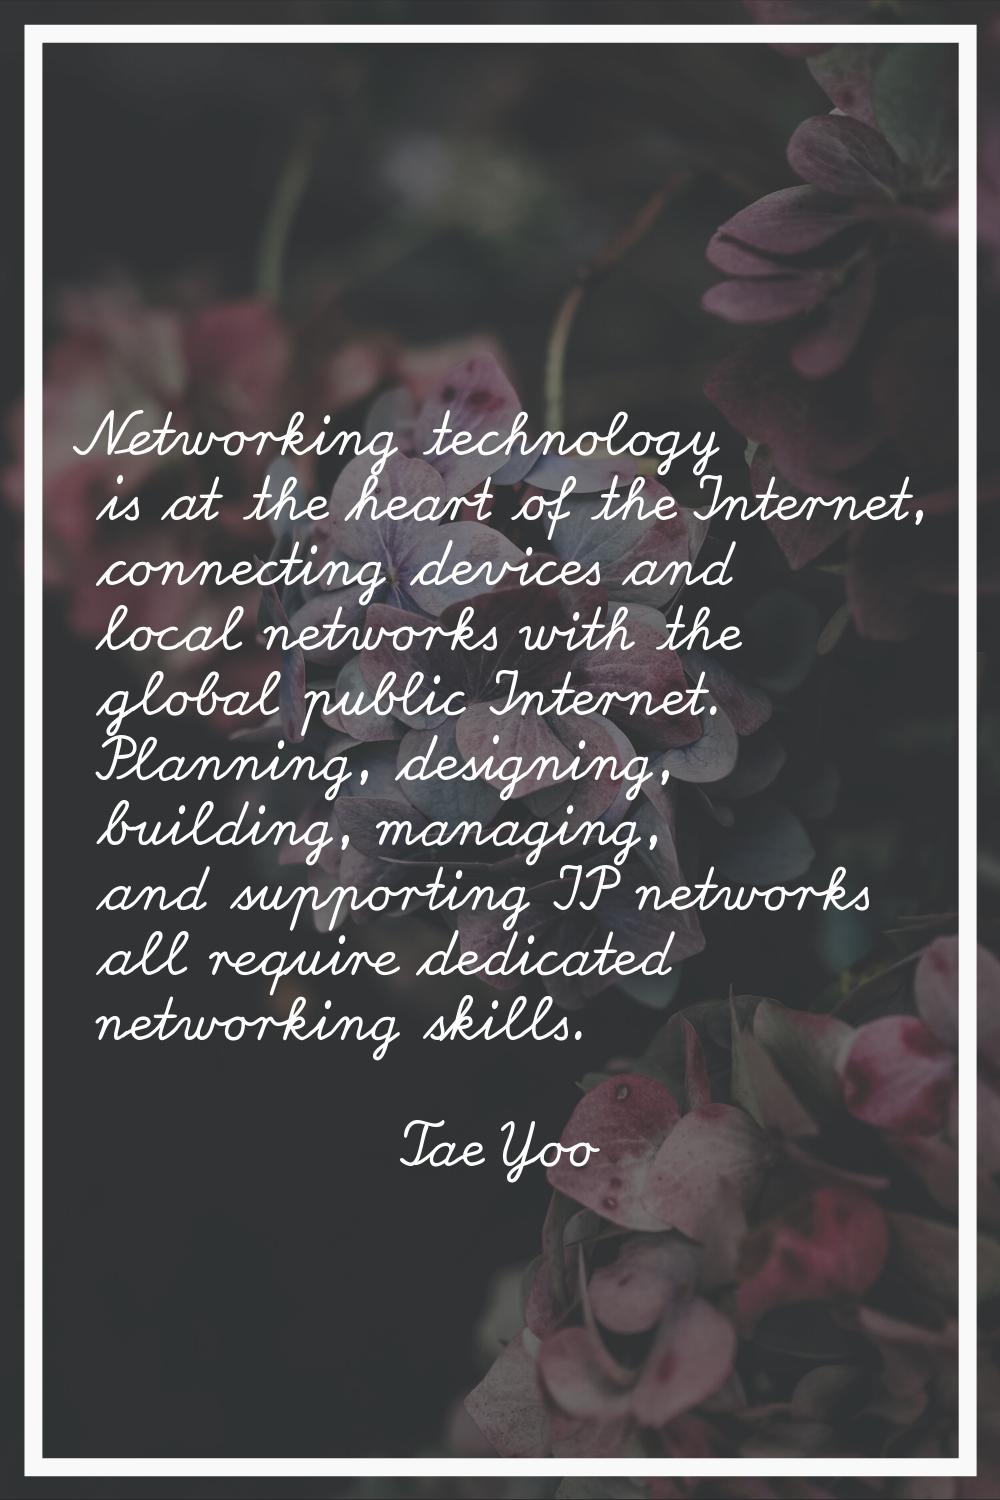 Networking technology is at the heart of the Internet, connecting devices and local networks with t